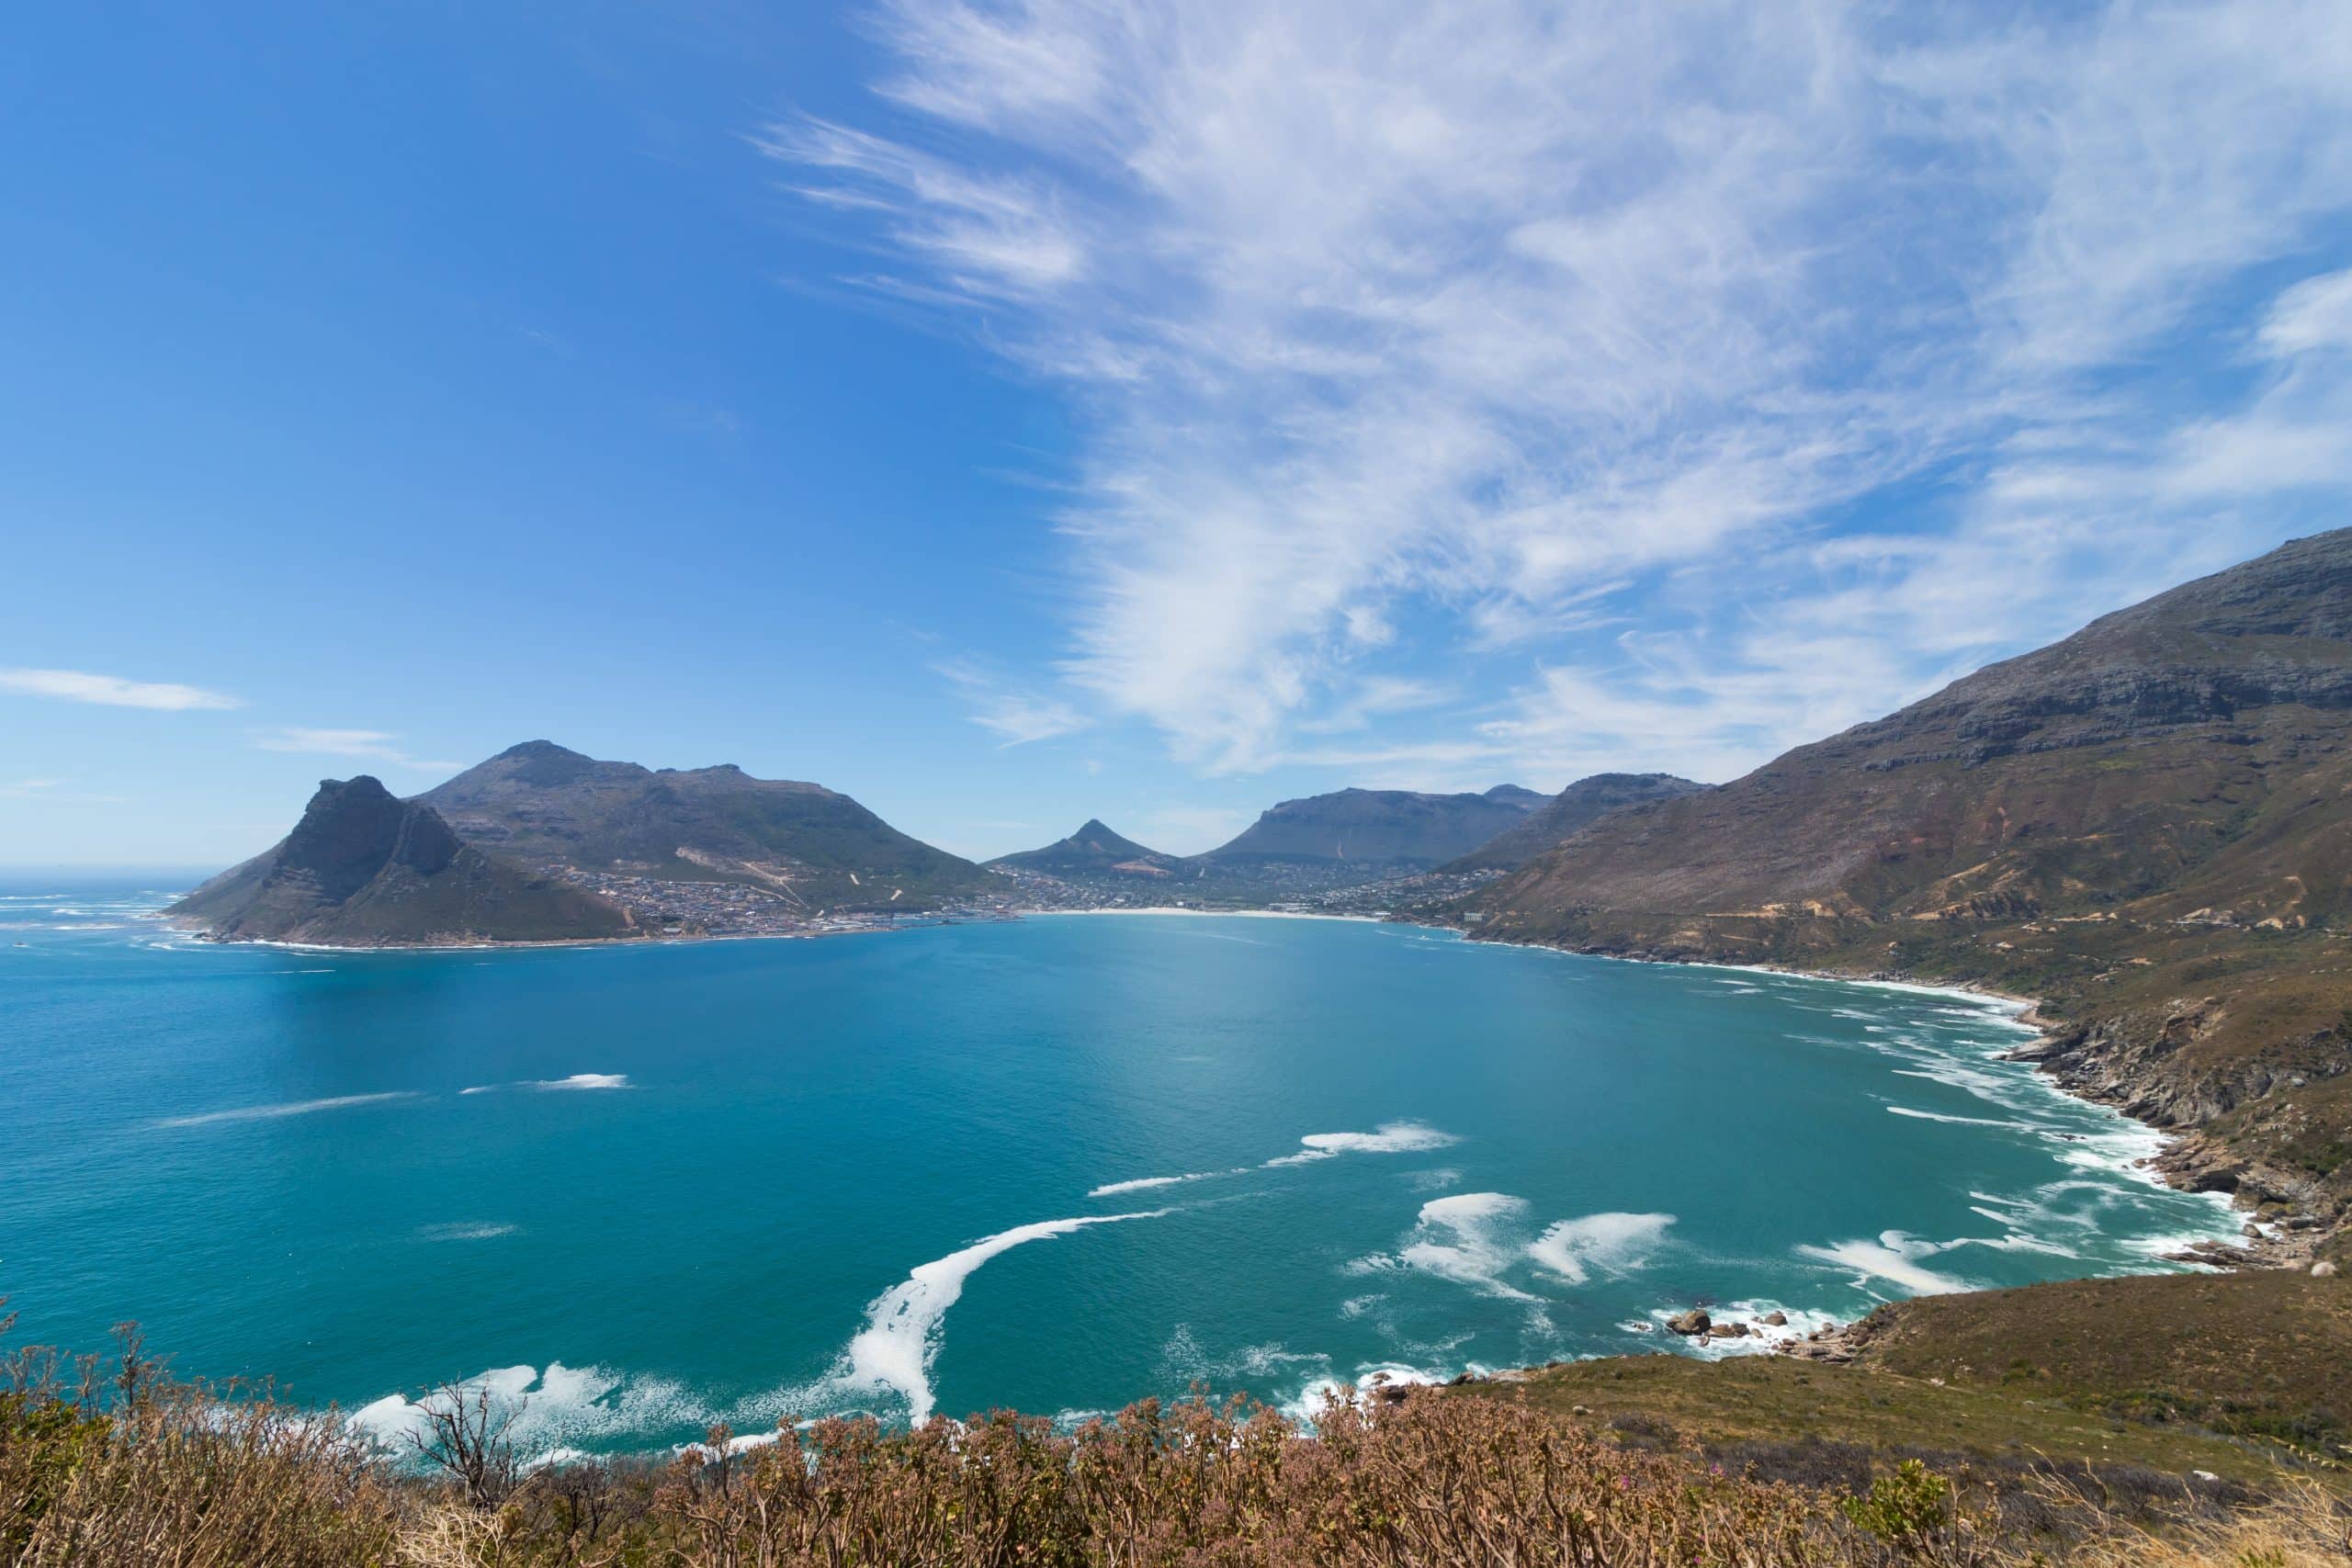 Breathtaking View Of The Chapman'S Peak By The Ocean Captured In South Africa